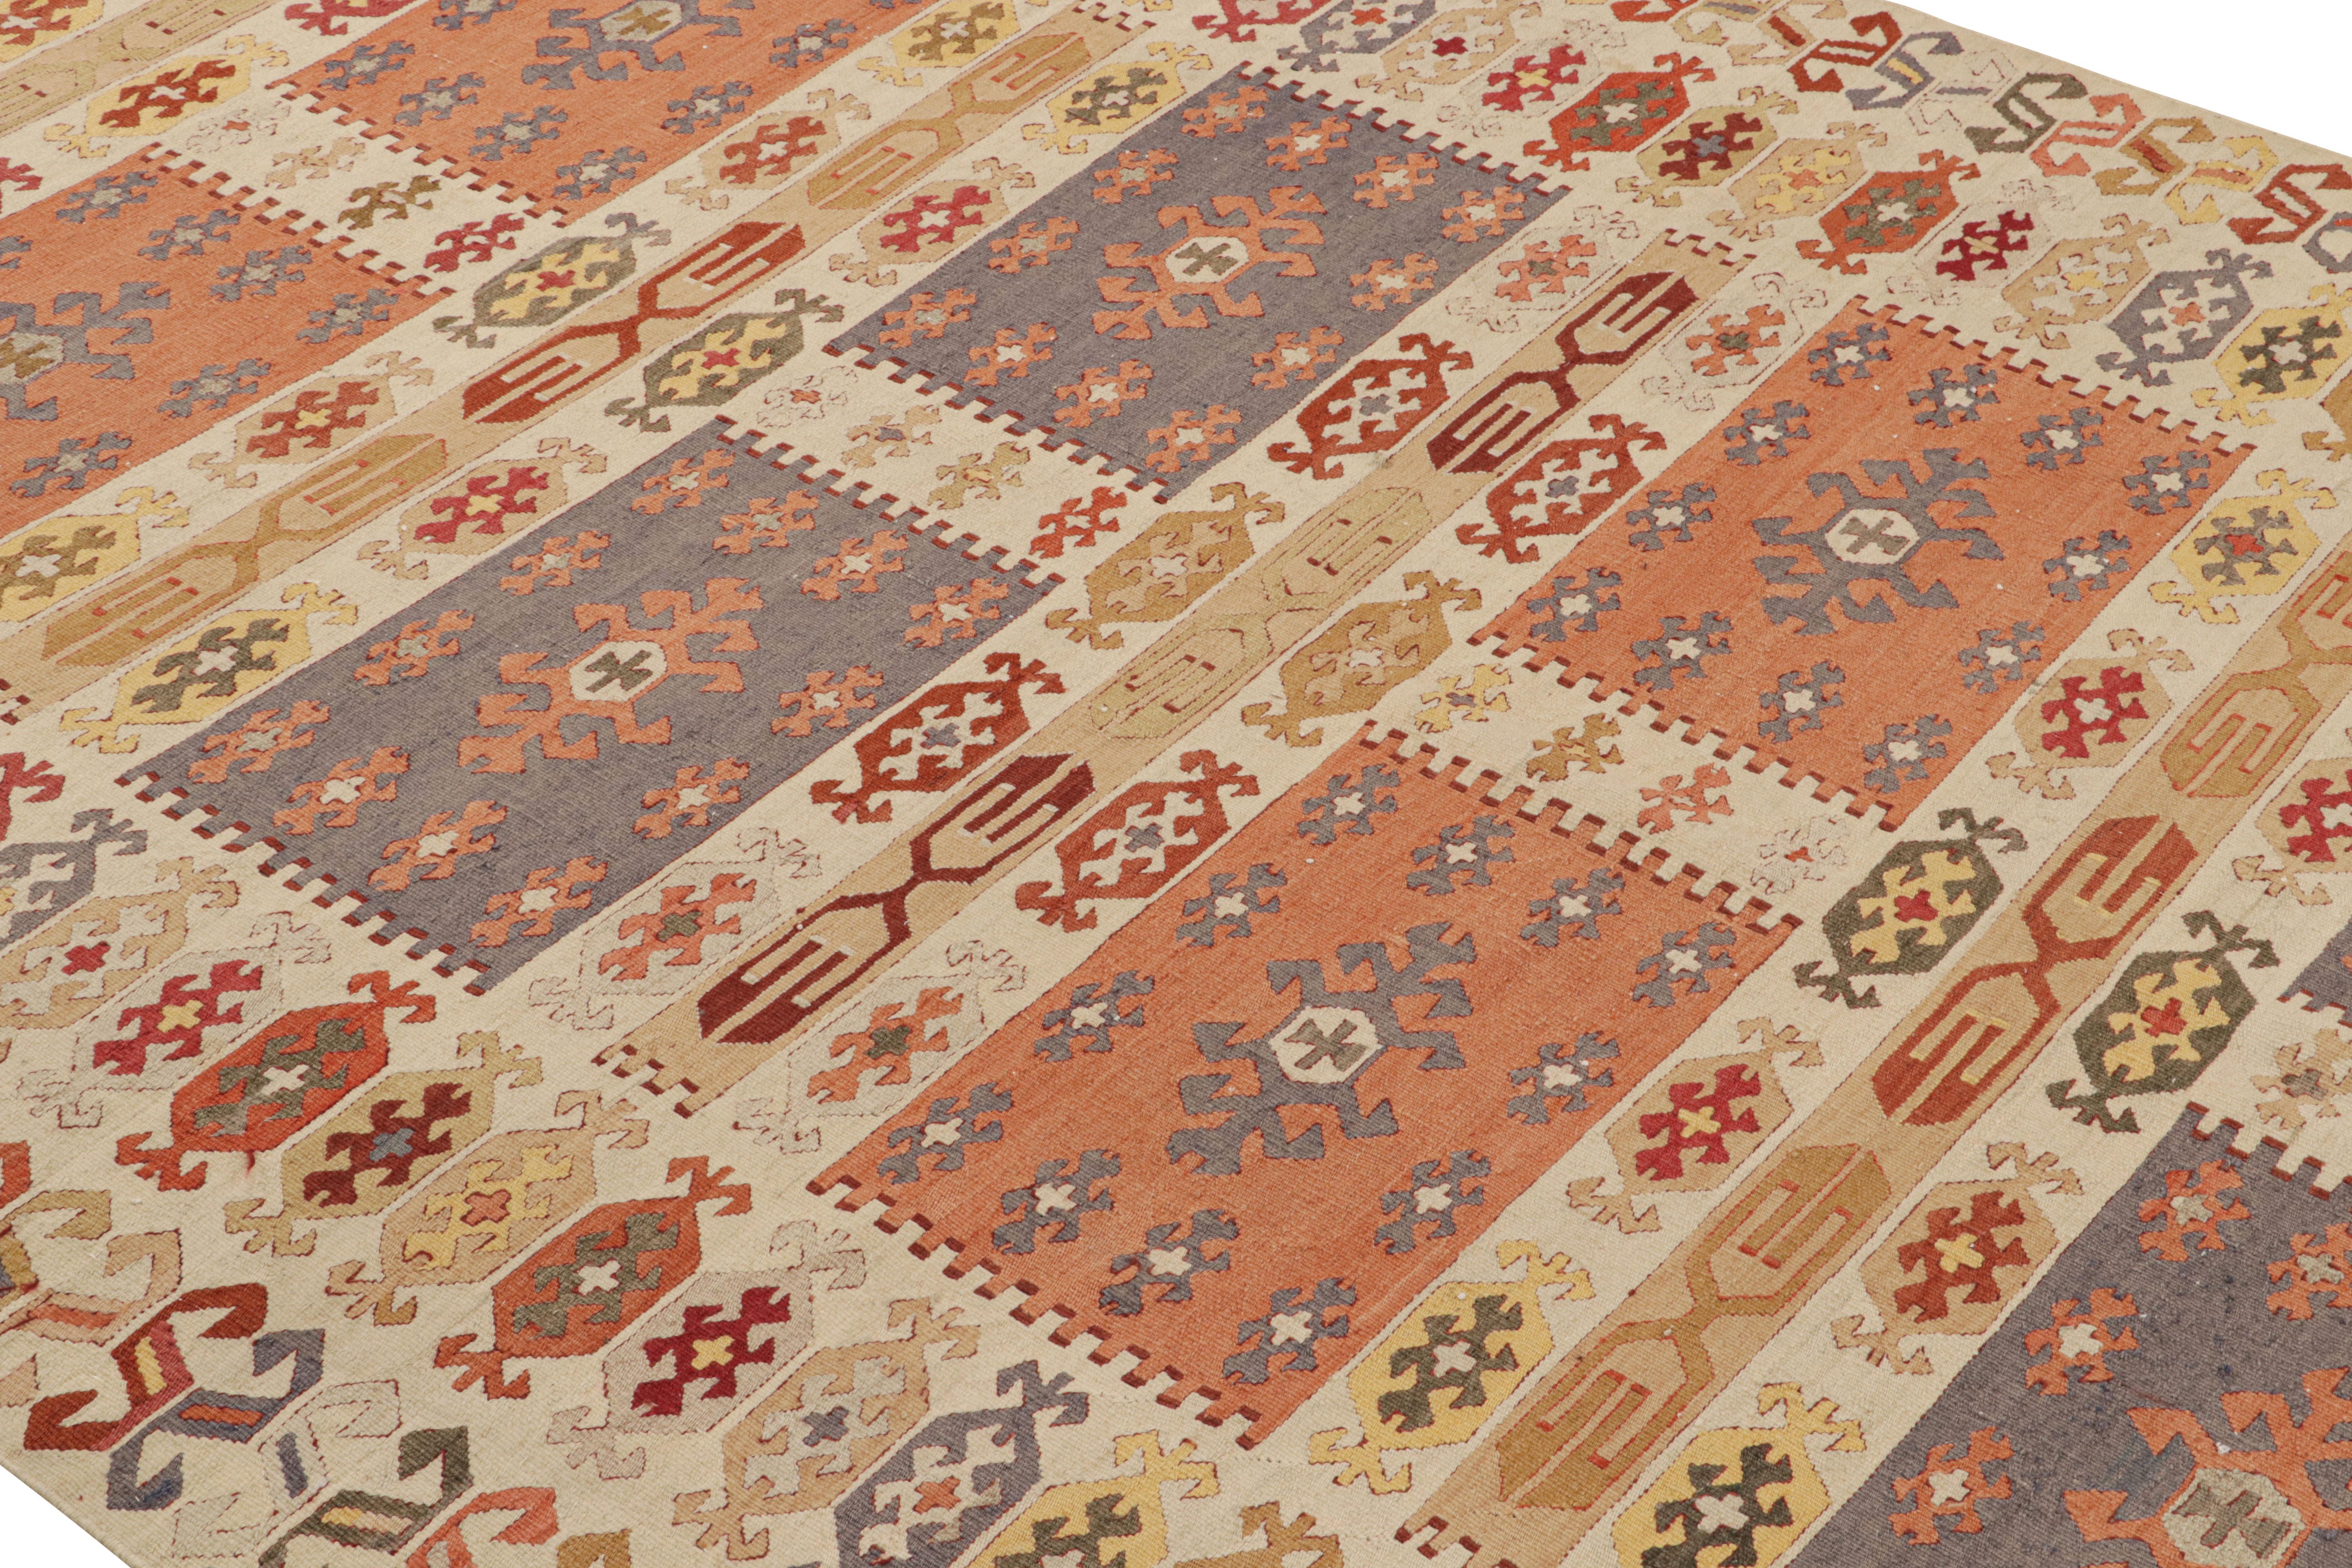 A 6 x 10 vintage Kilim rug of unique Manastire Turkish lineage, handwoven in wool, circa 1950-1960. Enjoying beige-brown hues complemented by lively tribal colorways throughout an intricate all over geometric pattern. Further in good condition for